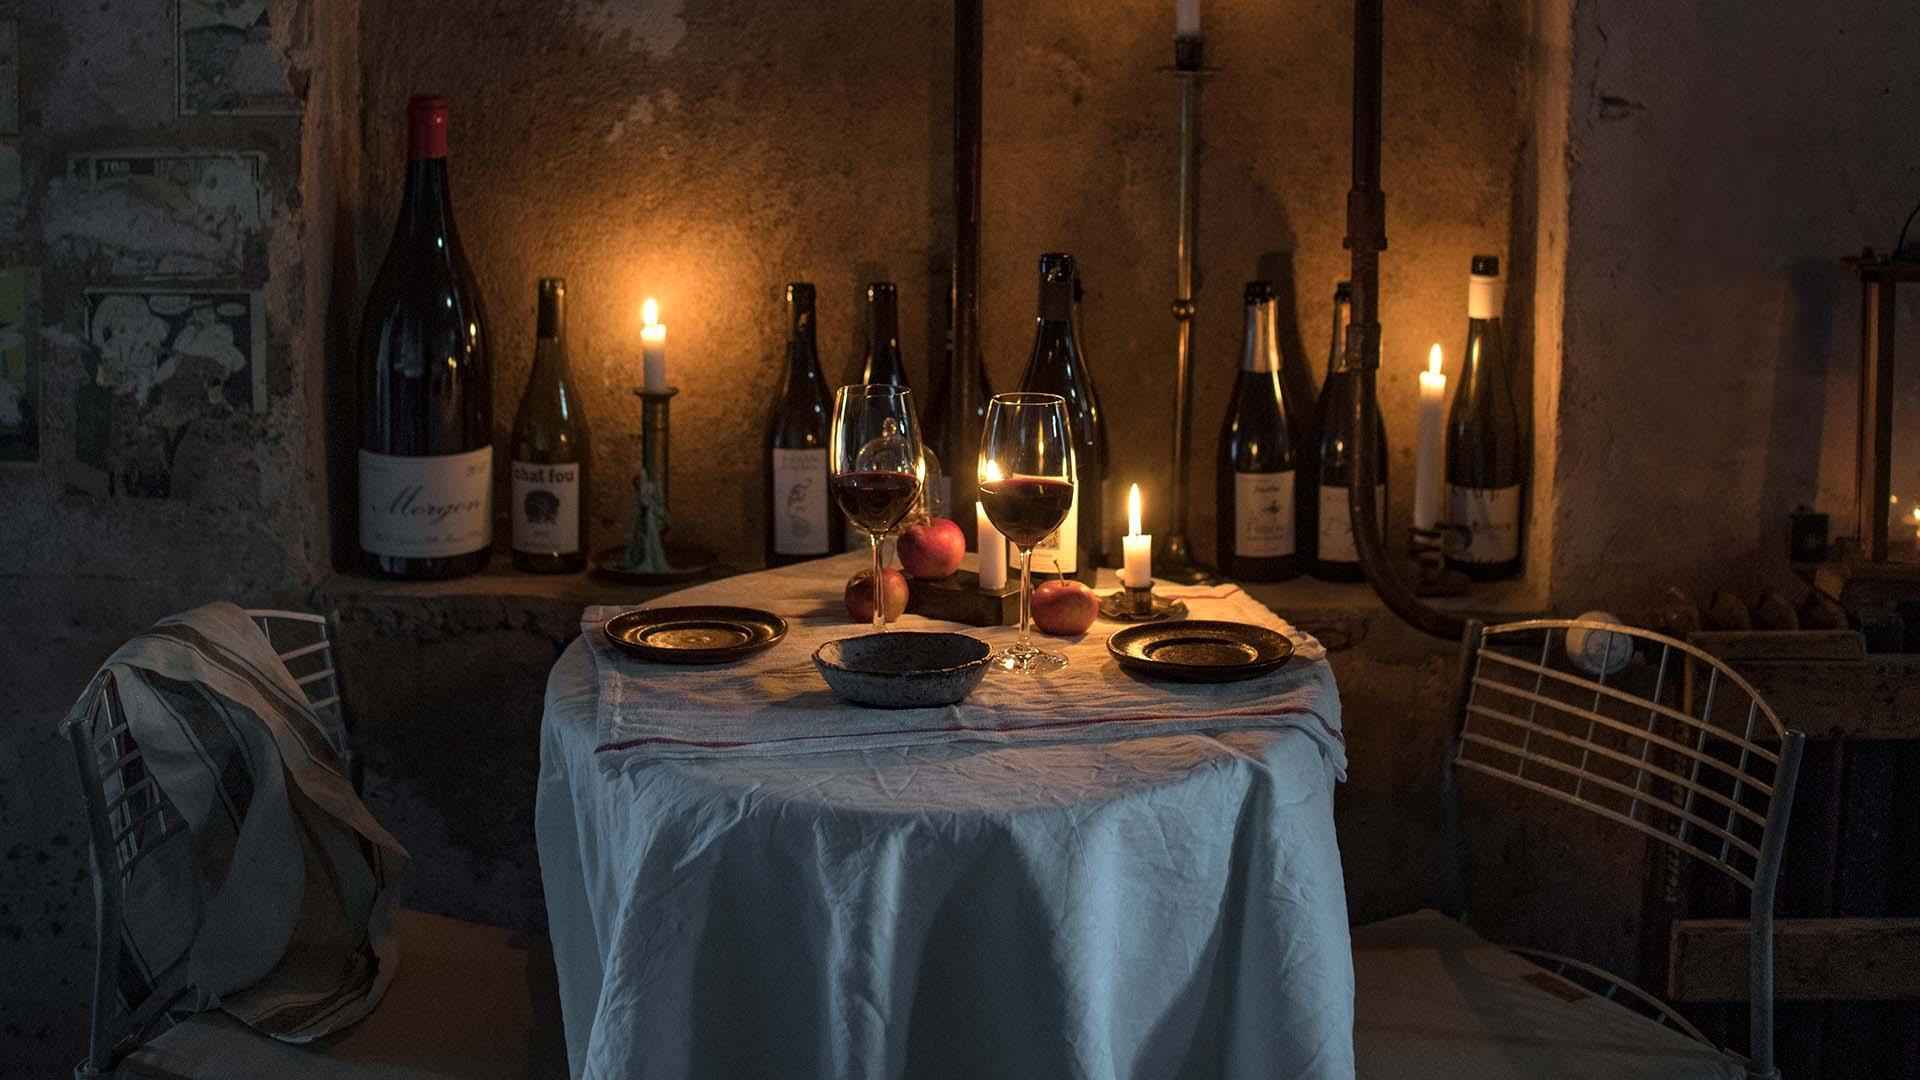 A table for two set with a white tablecloth, plates and two glasses filled with red wine. The wall is decorated with empty wine bottles and lit candles.